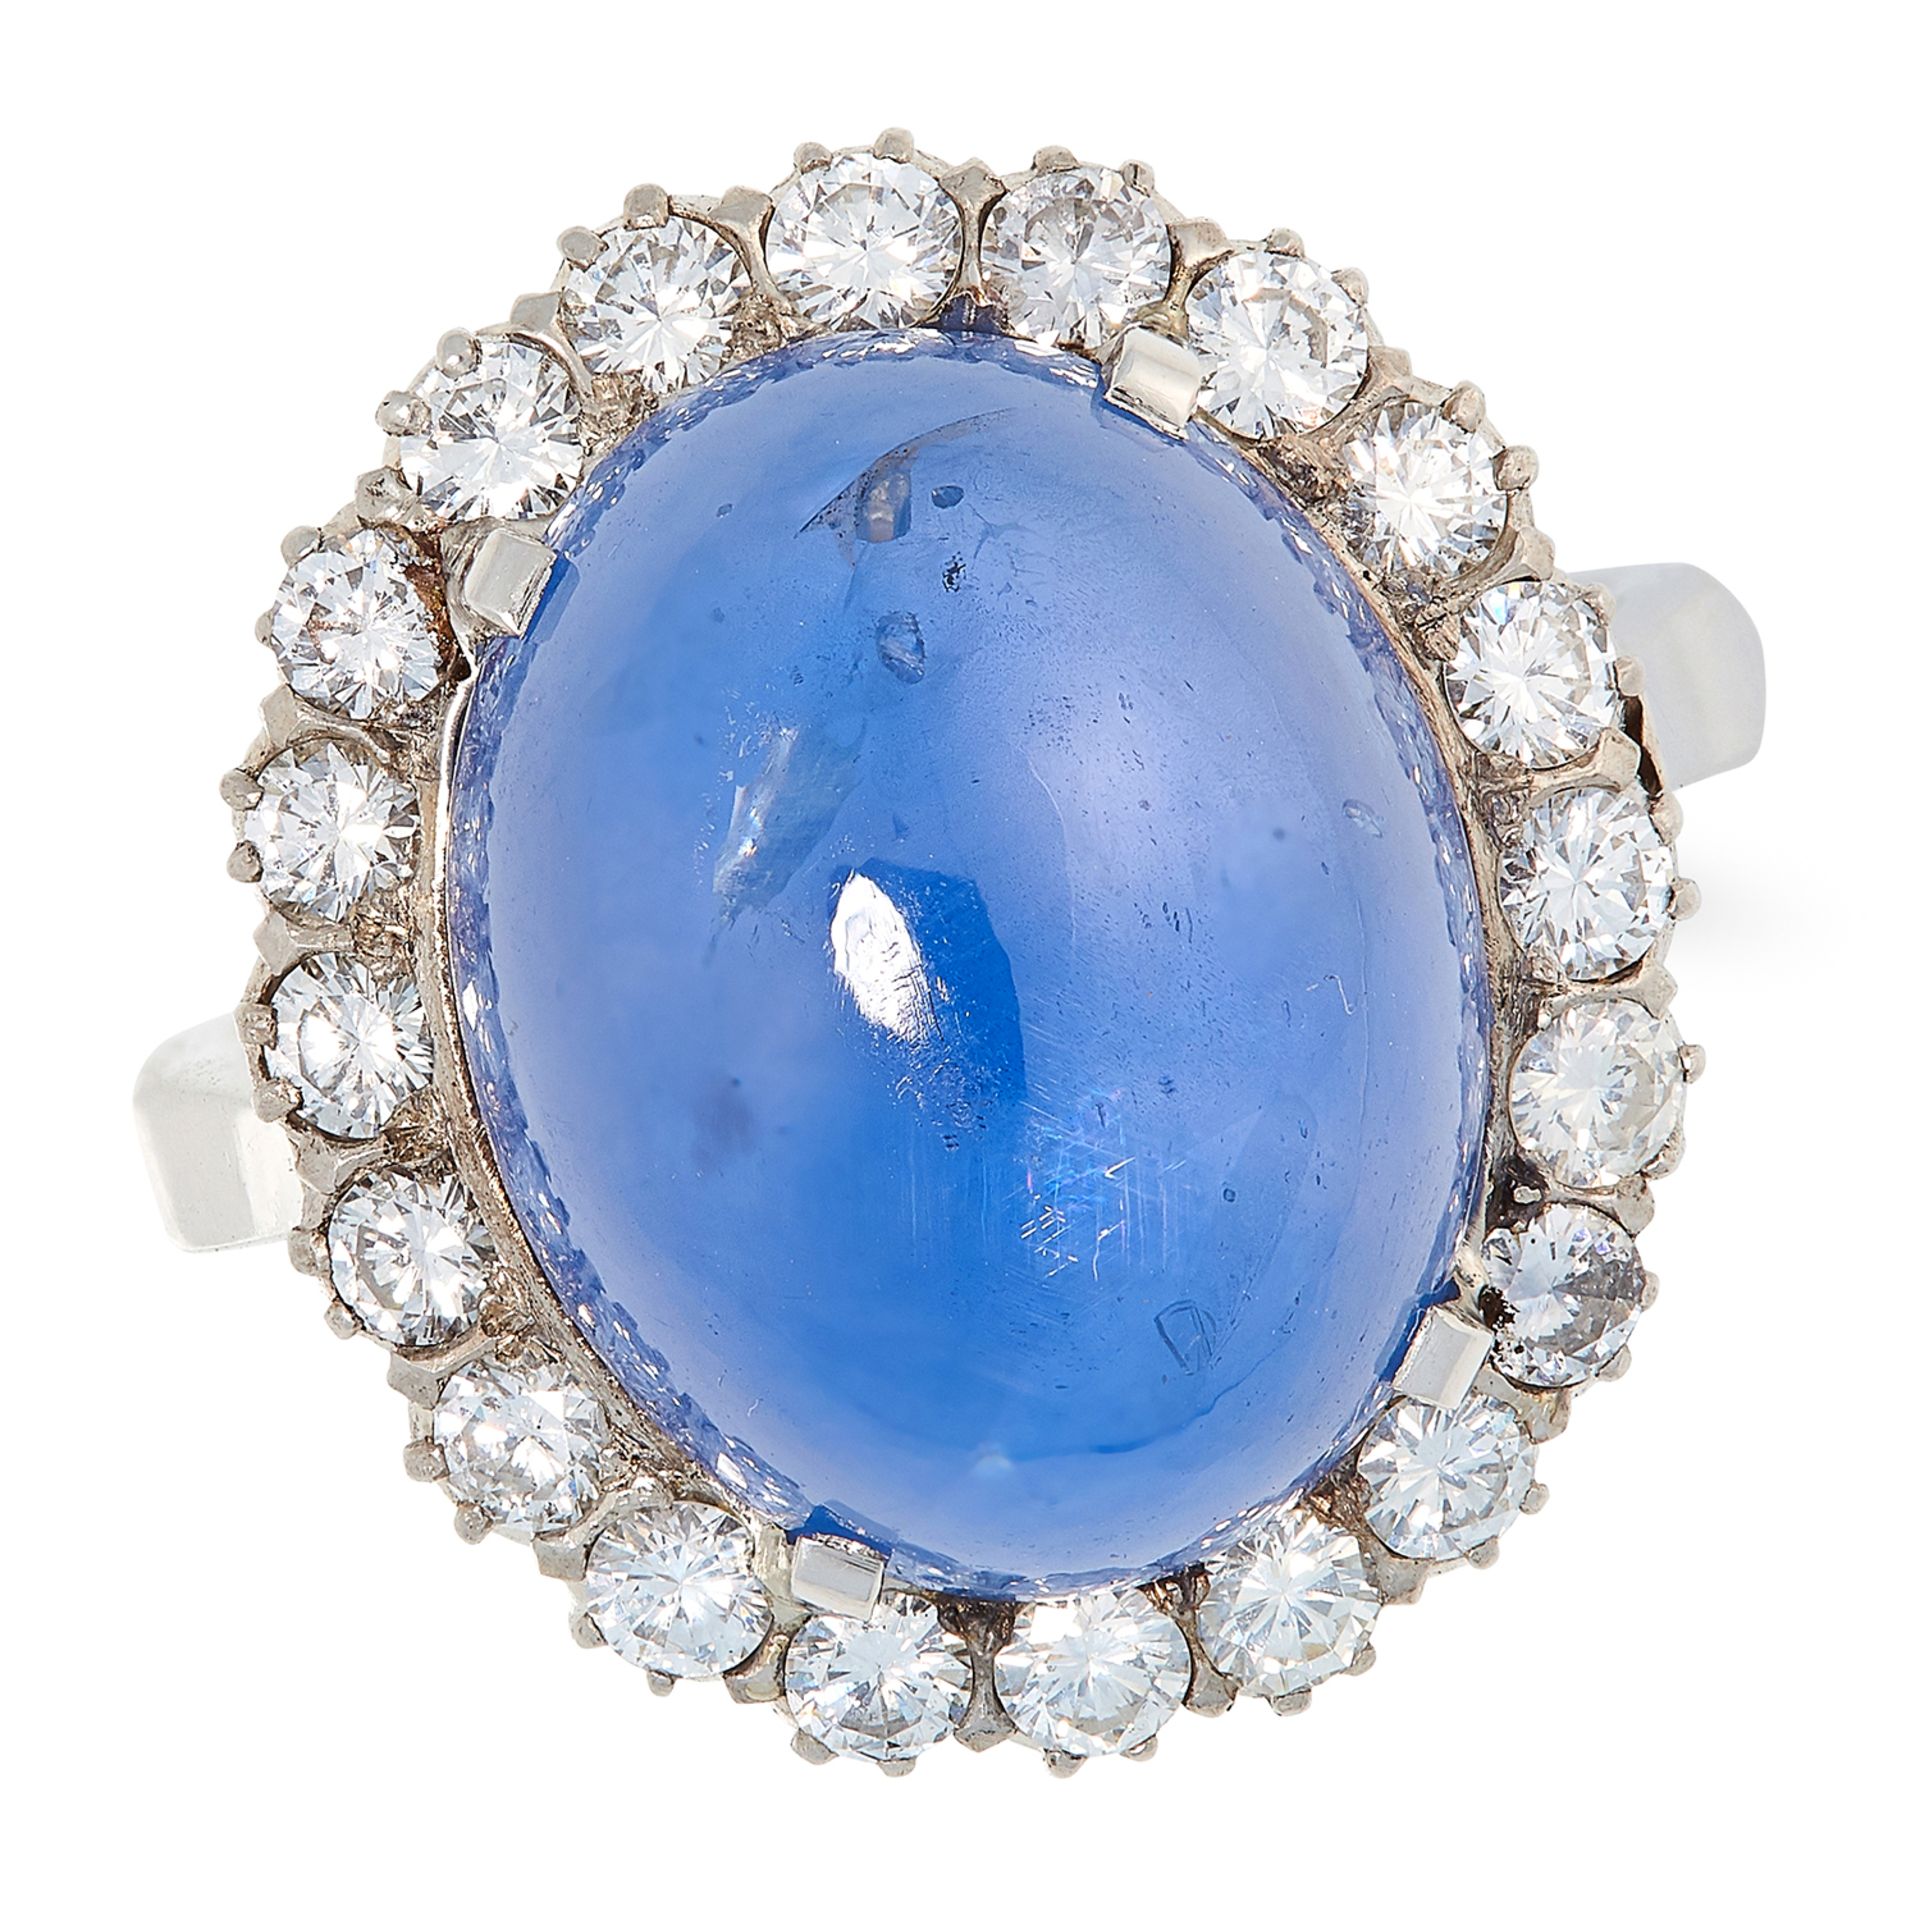 A CEYLON NO HEAT SAPPHIRE AND DIAMOND CLUSTER RING in platinum, set with a cabochon sapphire of 21.